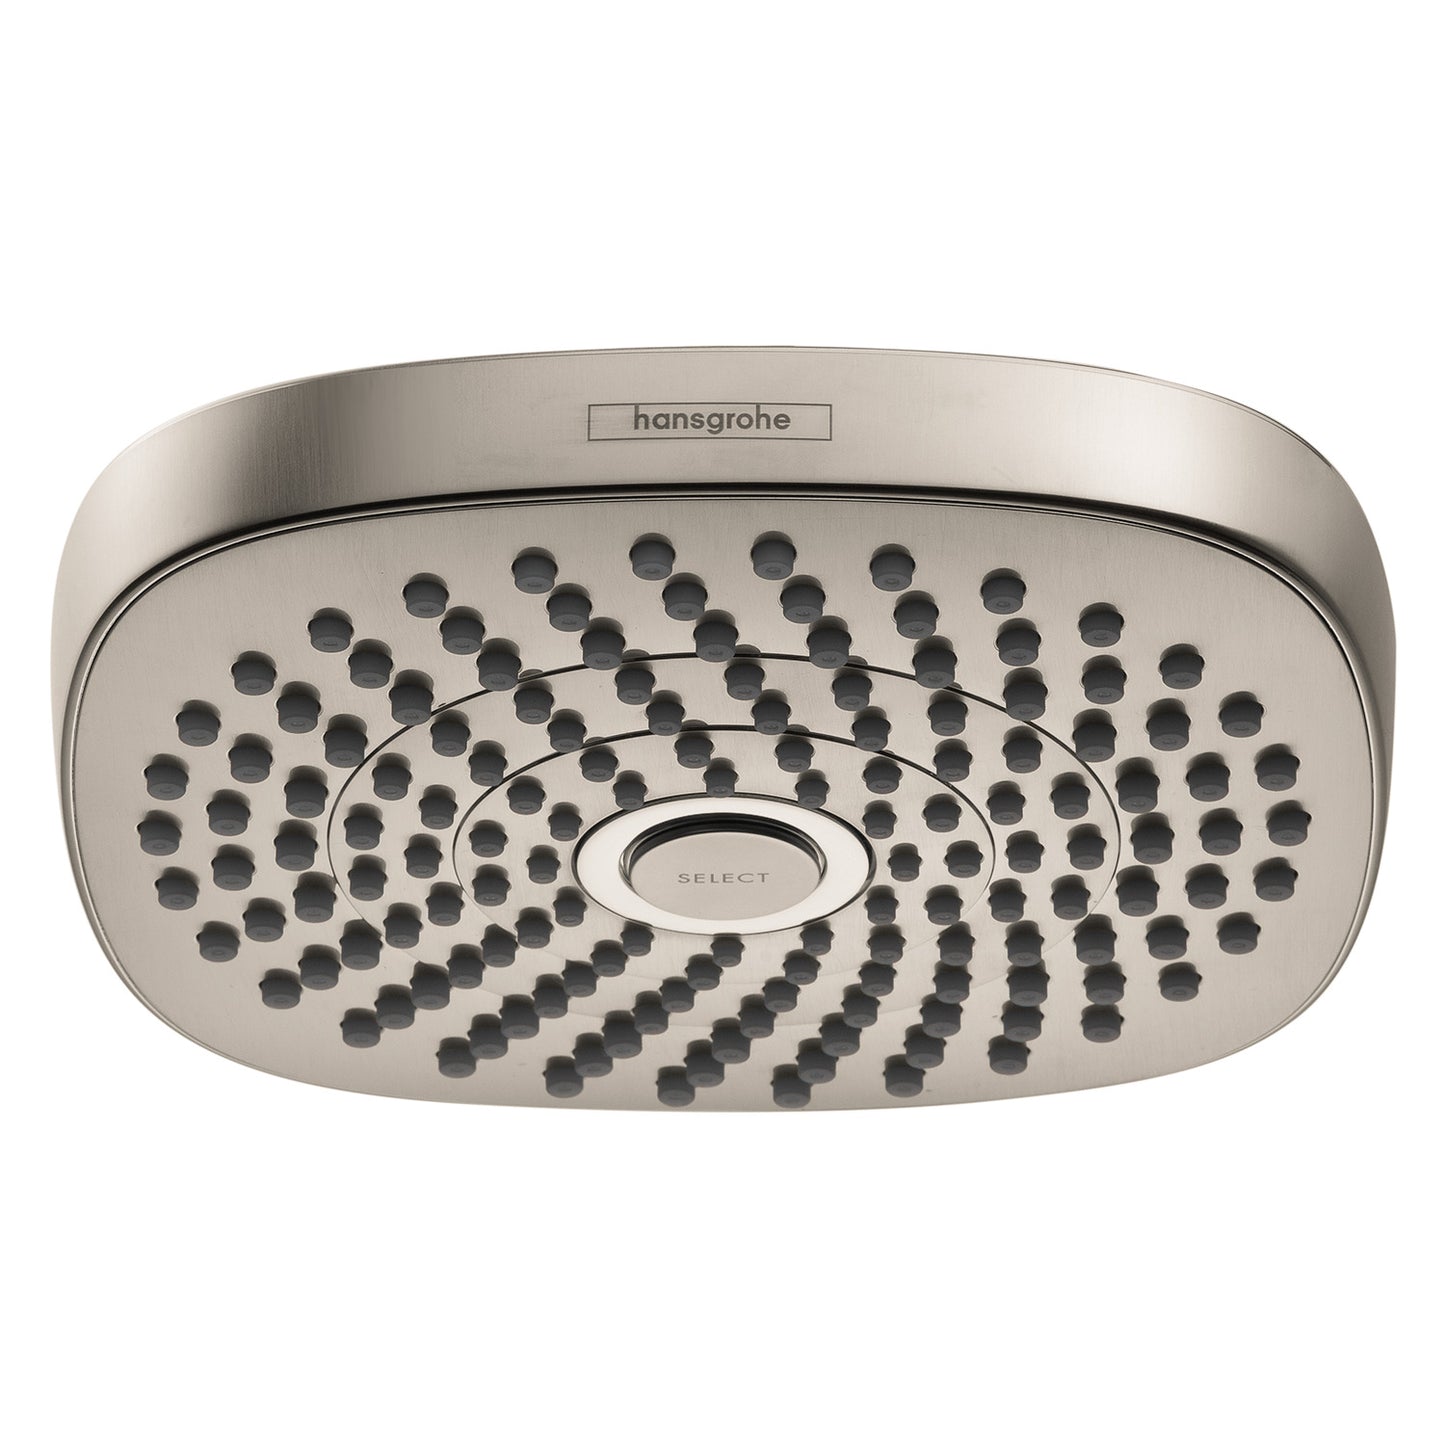 HANSGROHE 04925820 Brushed Nickel Croma Select E Modern Showerhead 2.5 GPM